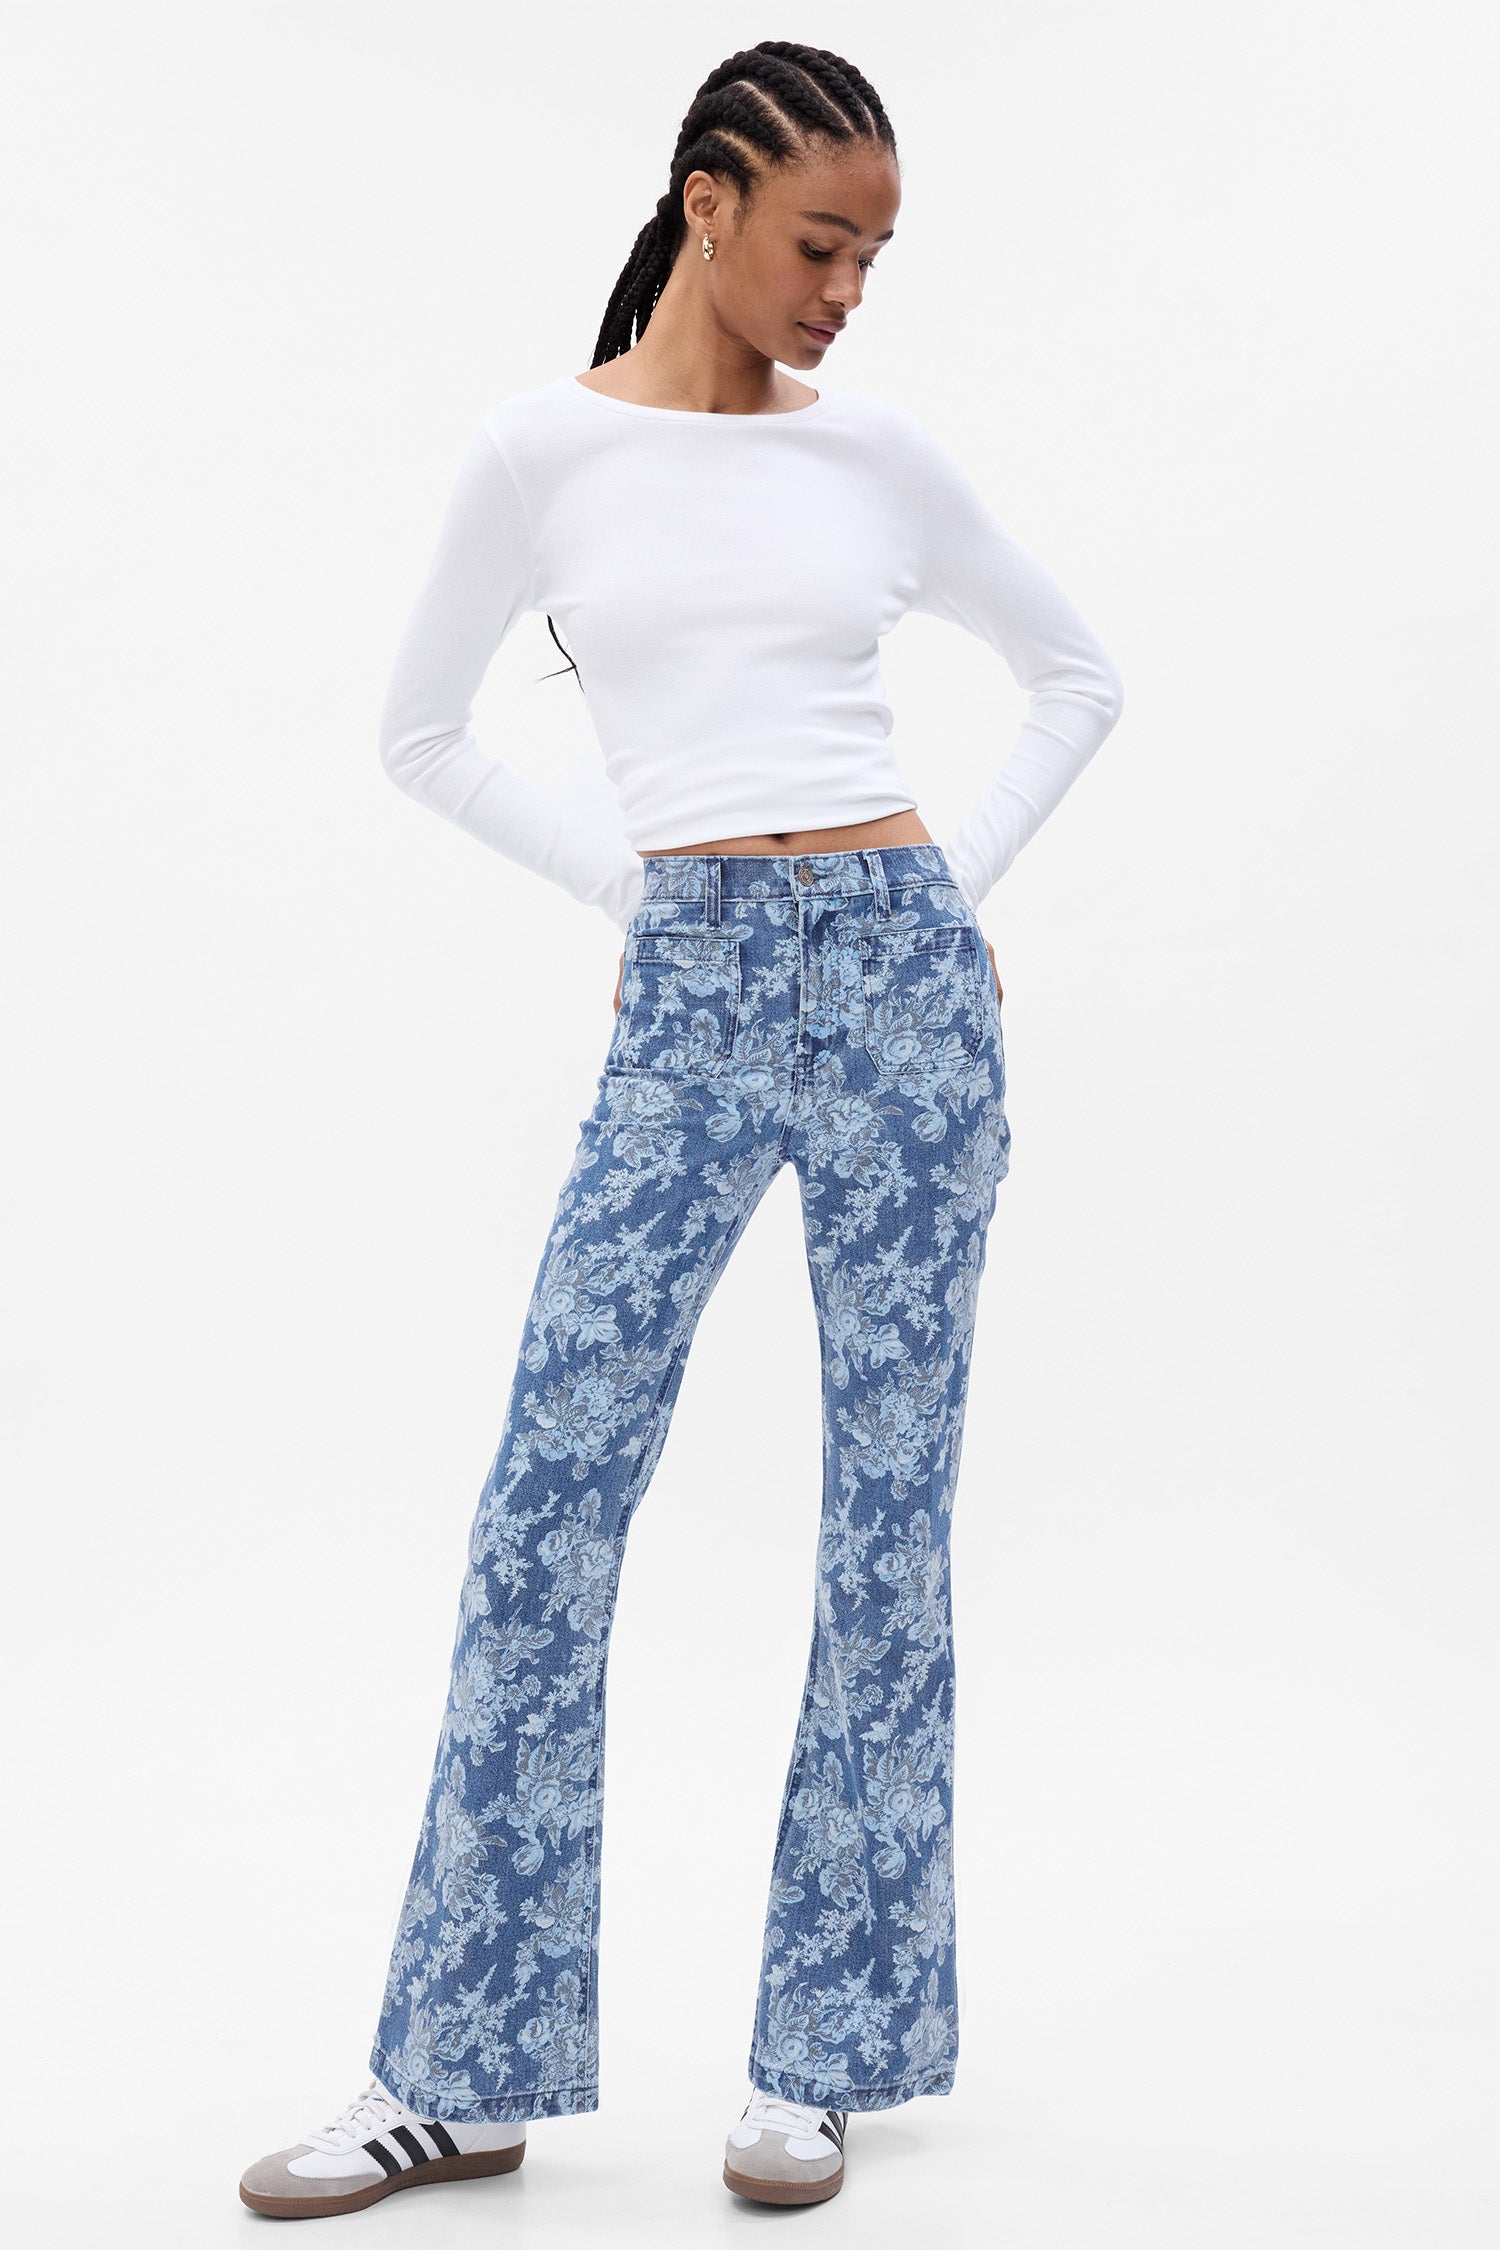 Model wearing blue floral high rise flare jeans with square pockets at the front